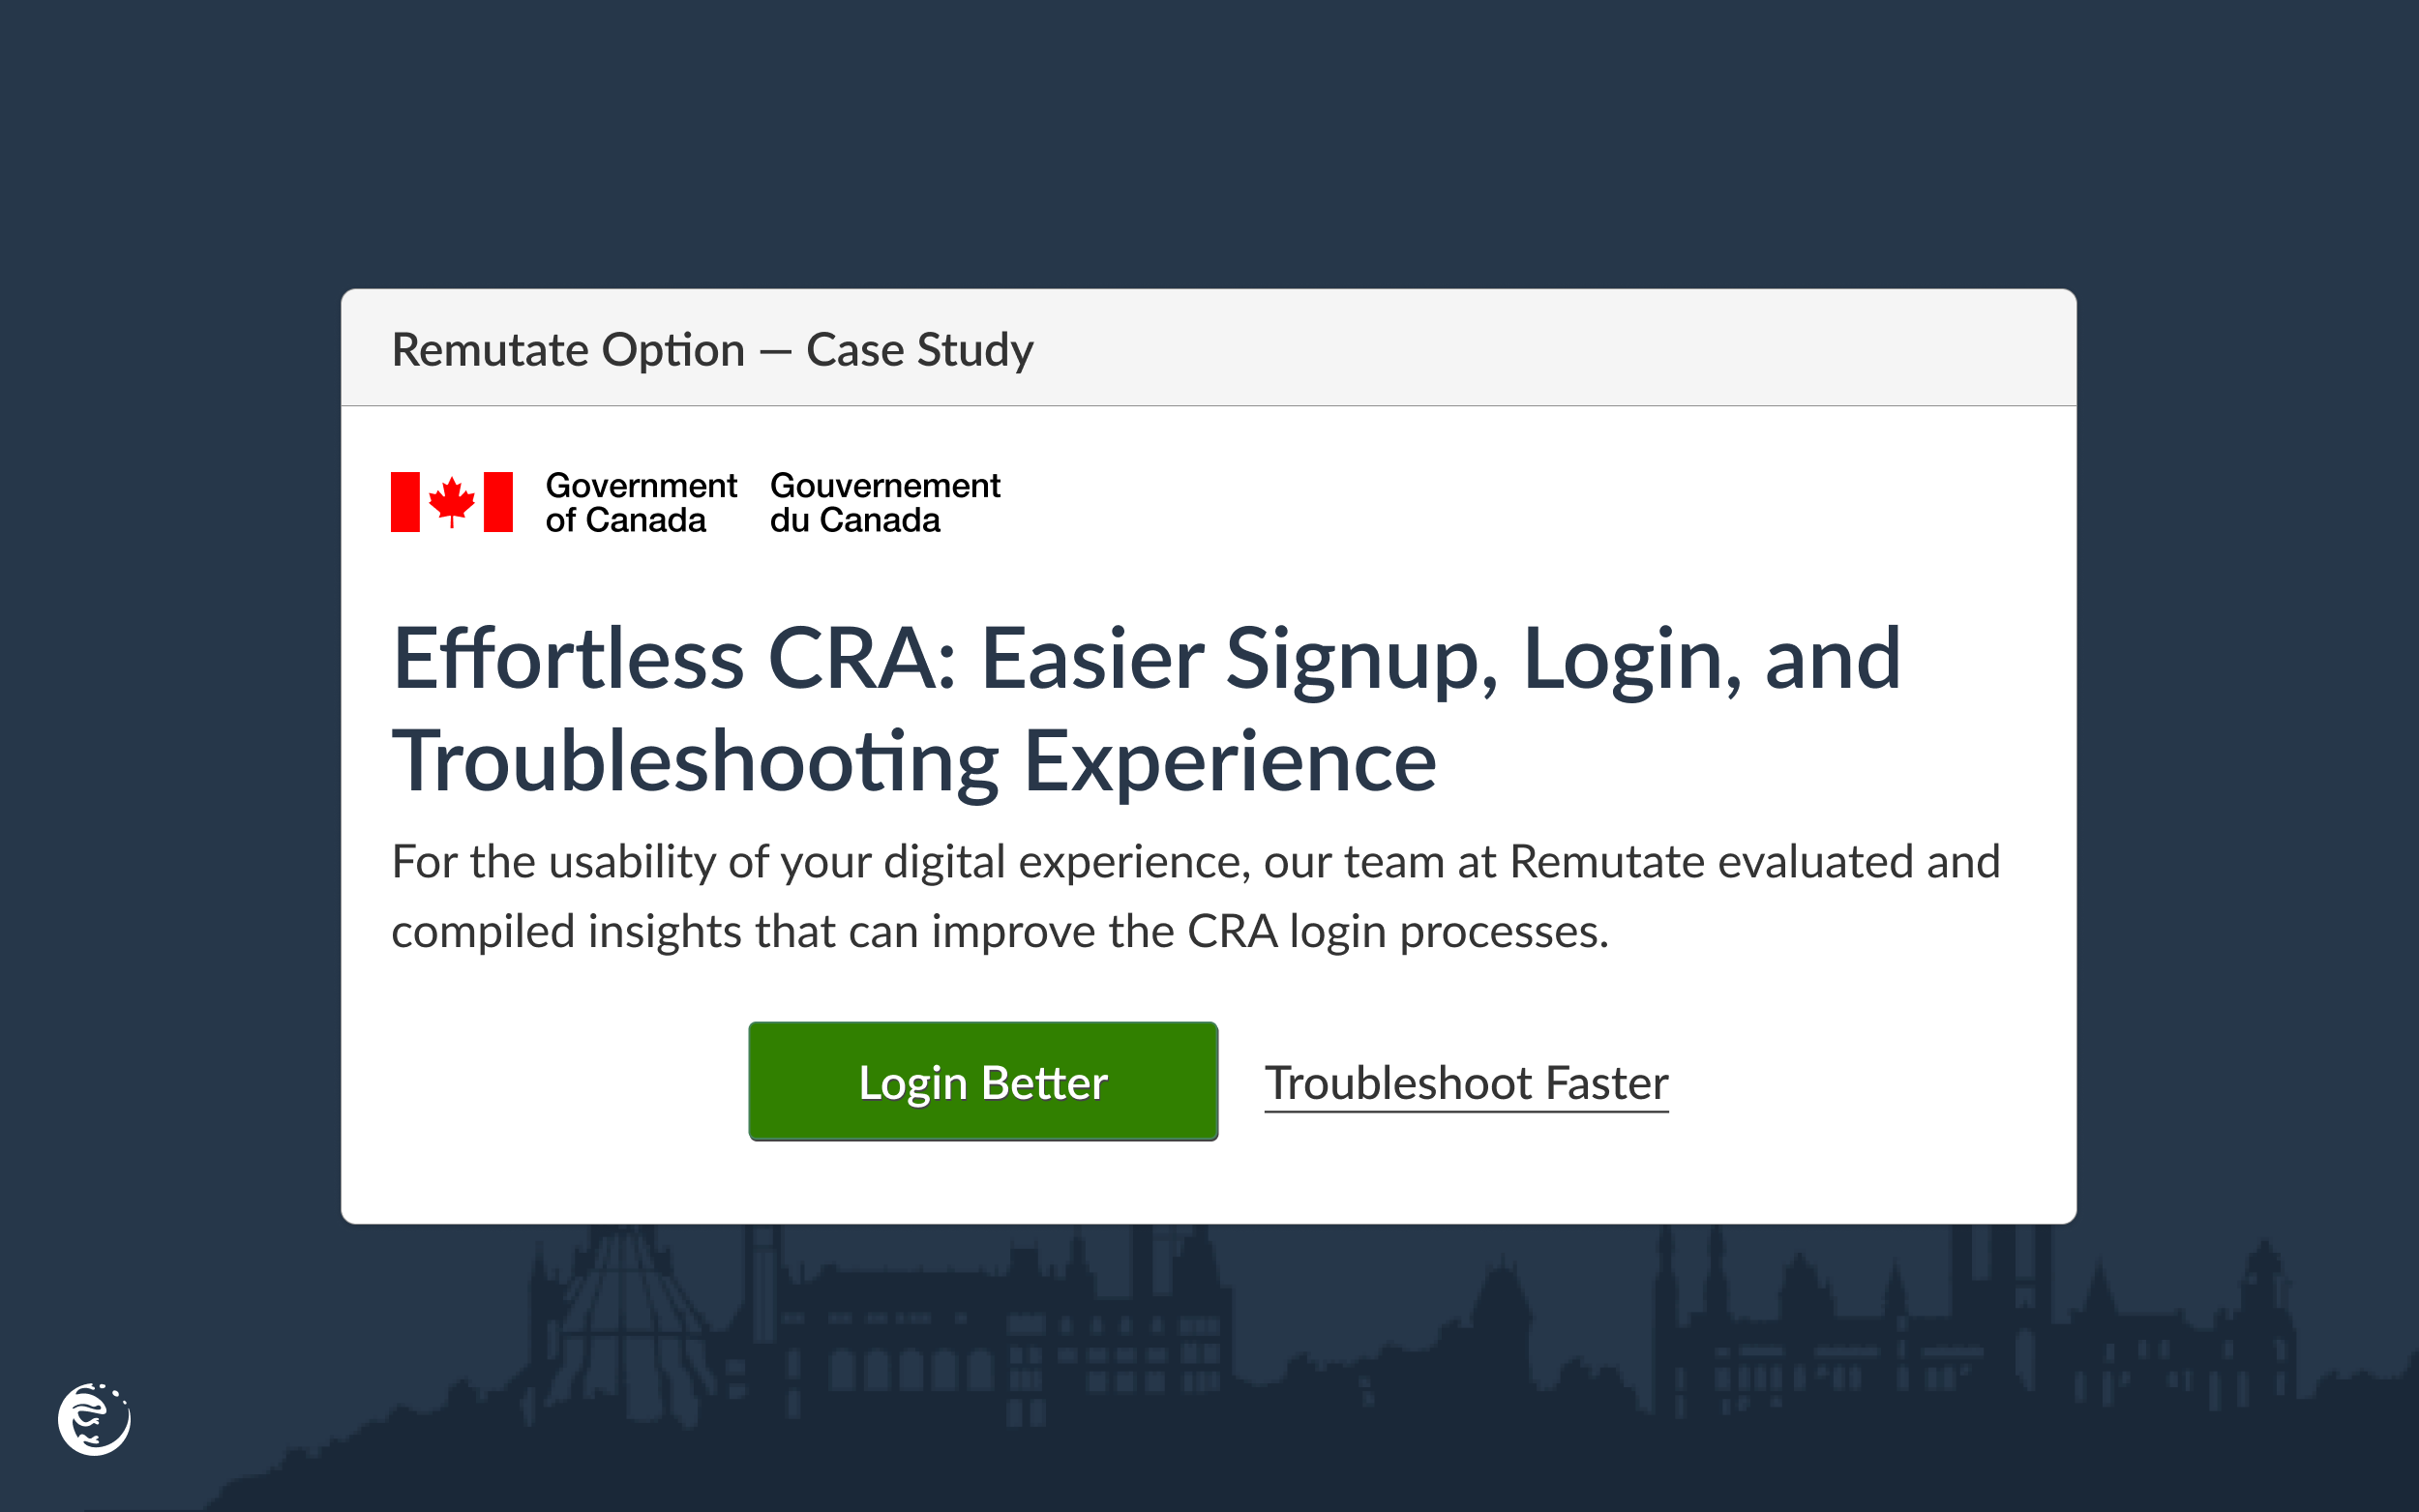 Effortless CRA: Easier Signup, Login, and Troubleshooting Experience